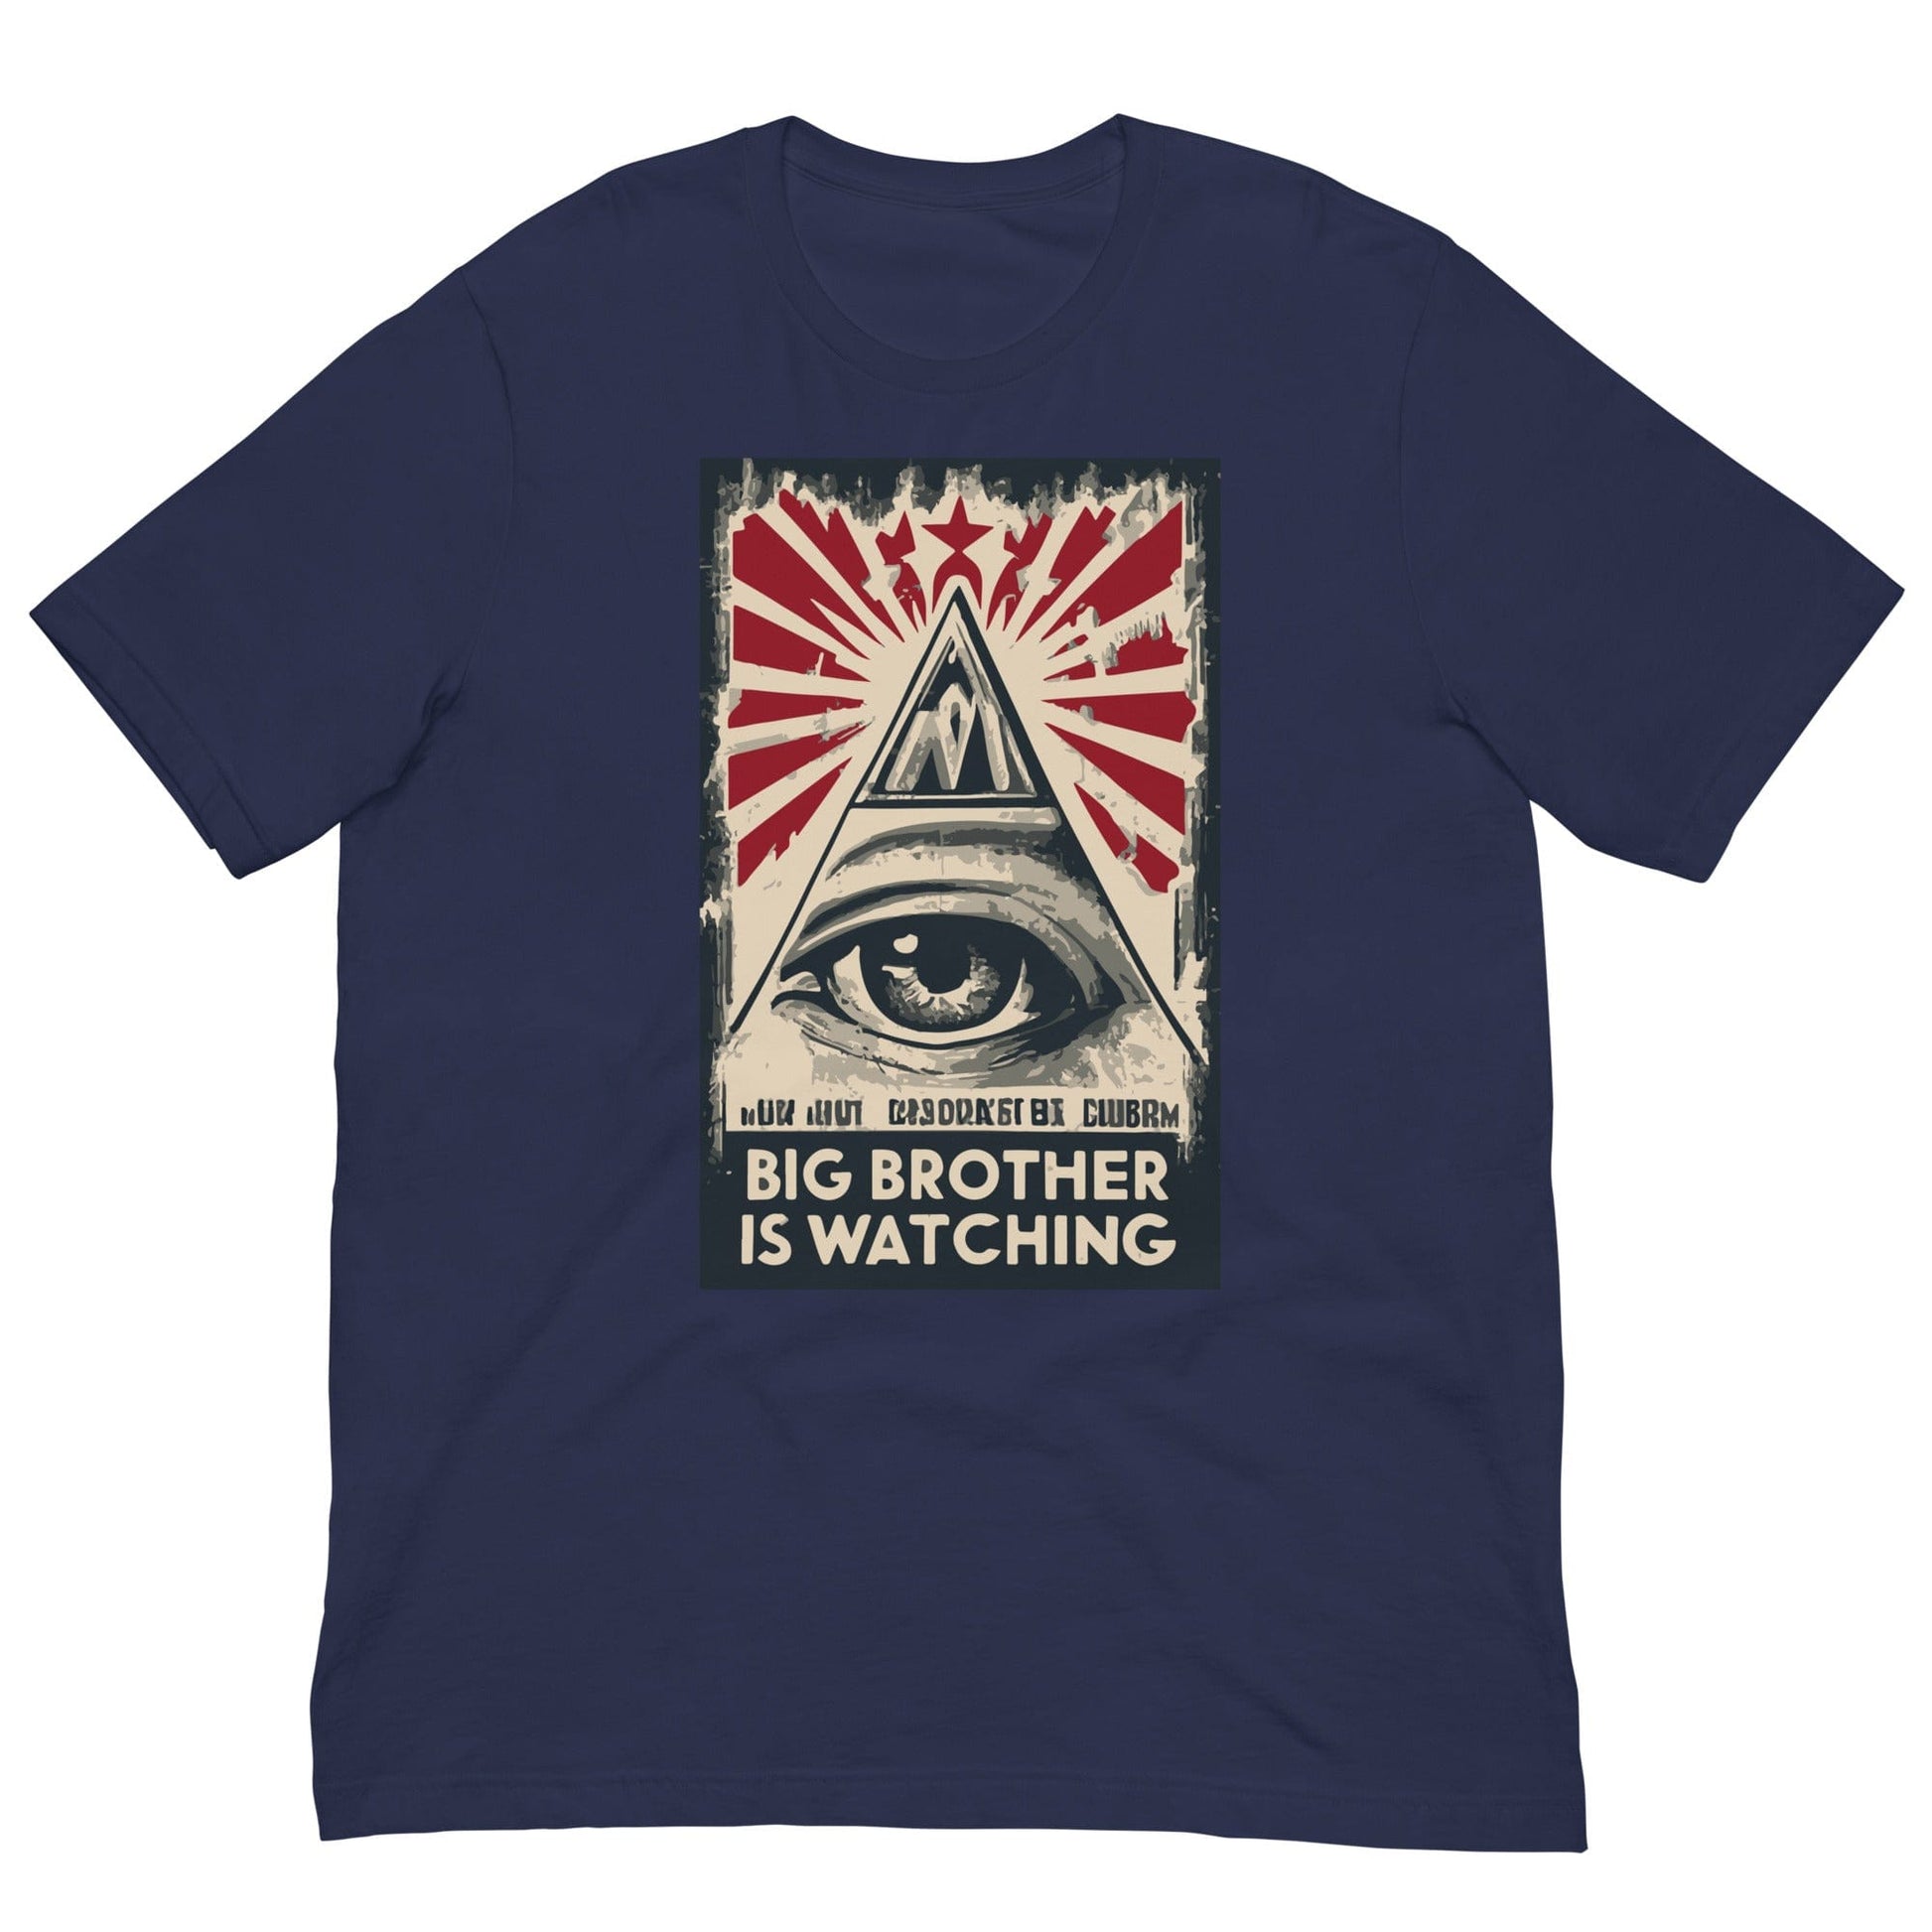 Big Brother is watching T-shirt Navy / XS